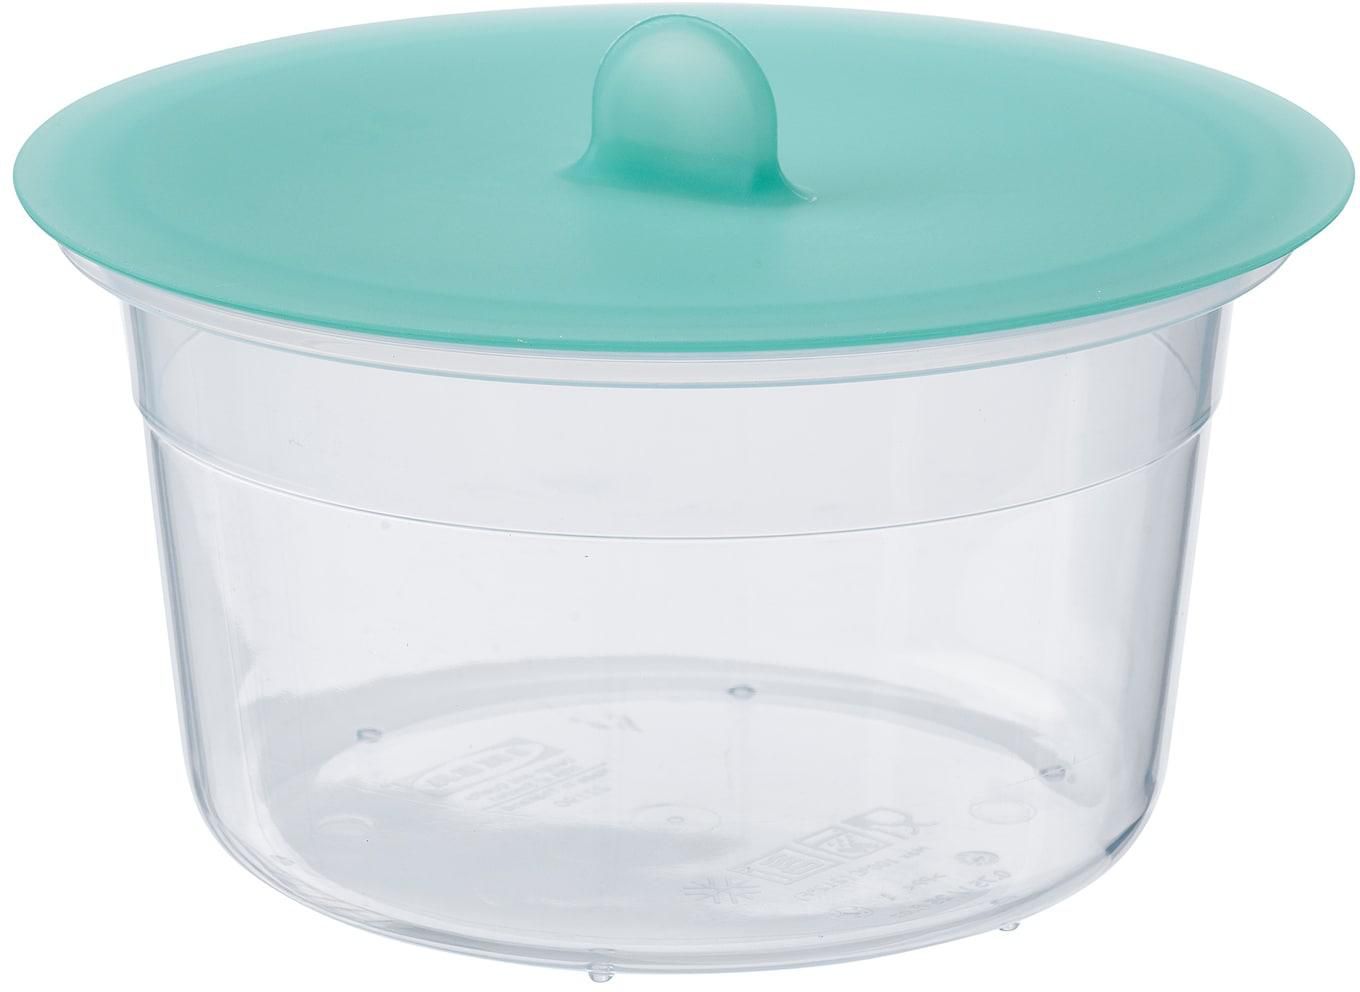 IKEA 365+ Food container with lid - round plastic/silicone 750 ml